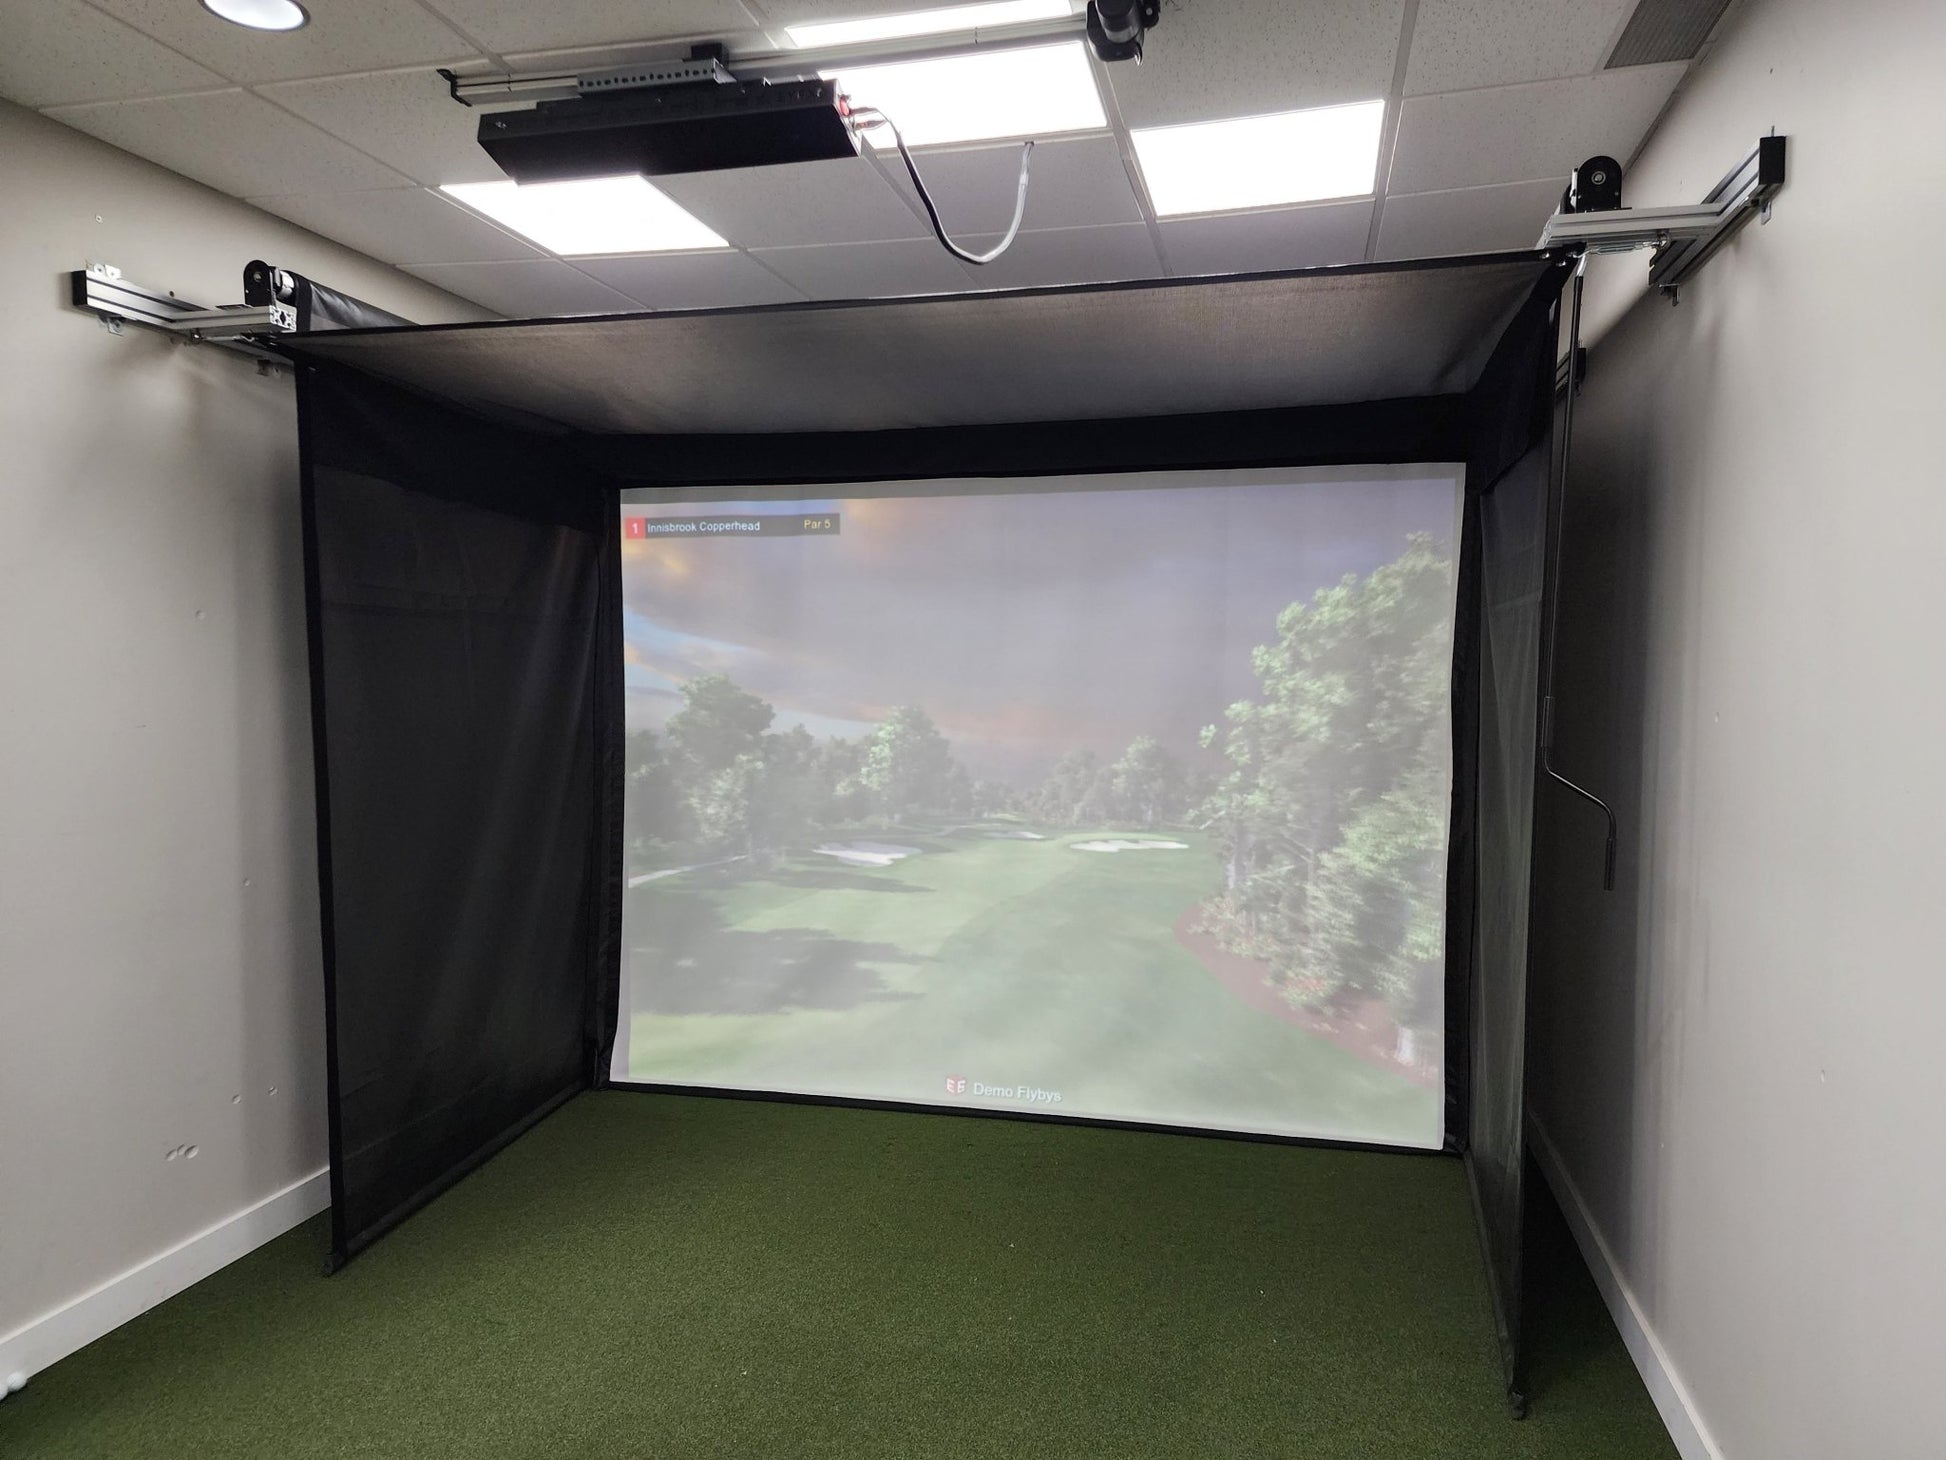 ProTee RLX Golf Package with SportScreen Retractable Golf Studio - Big Horn Golfer